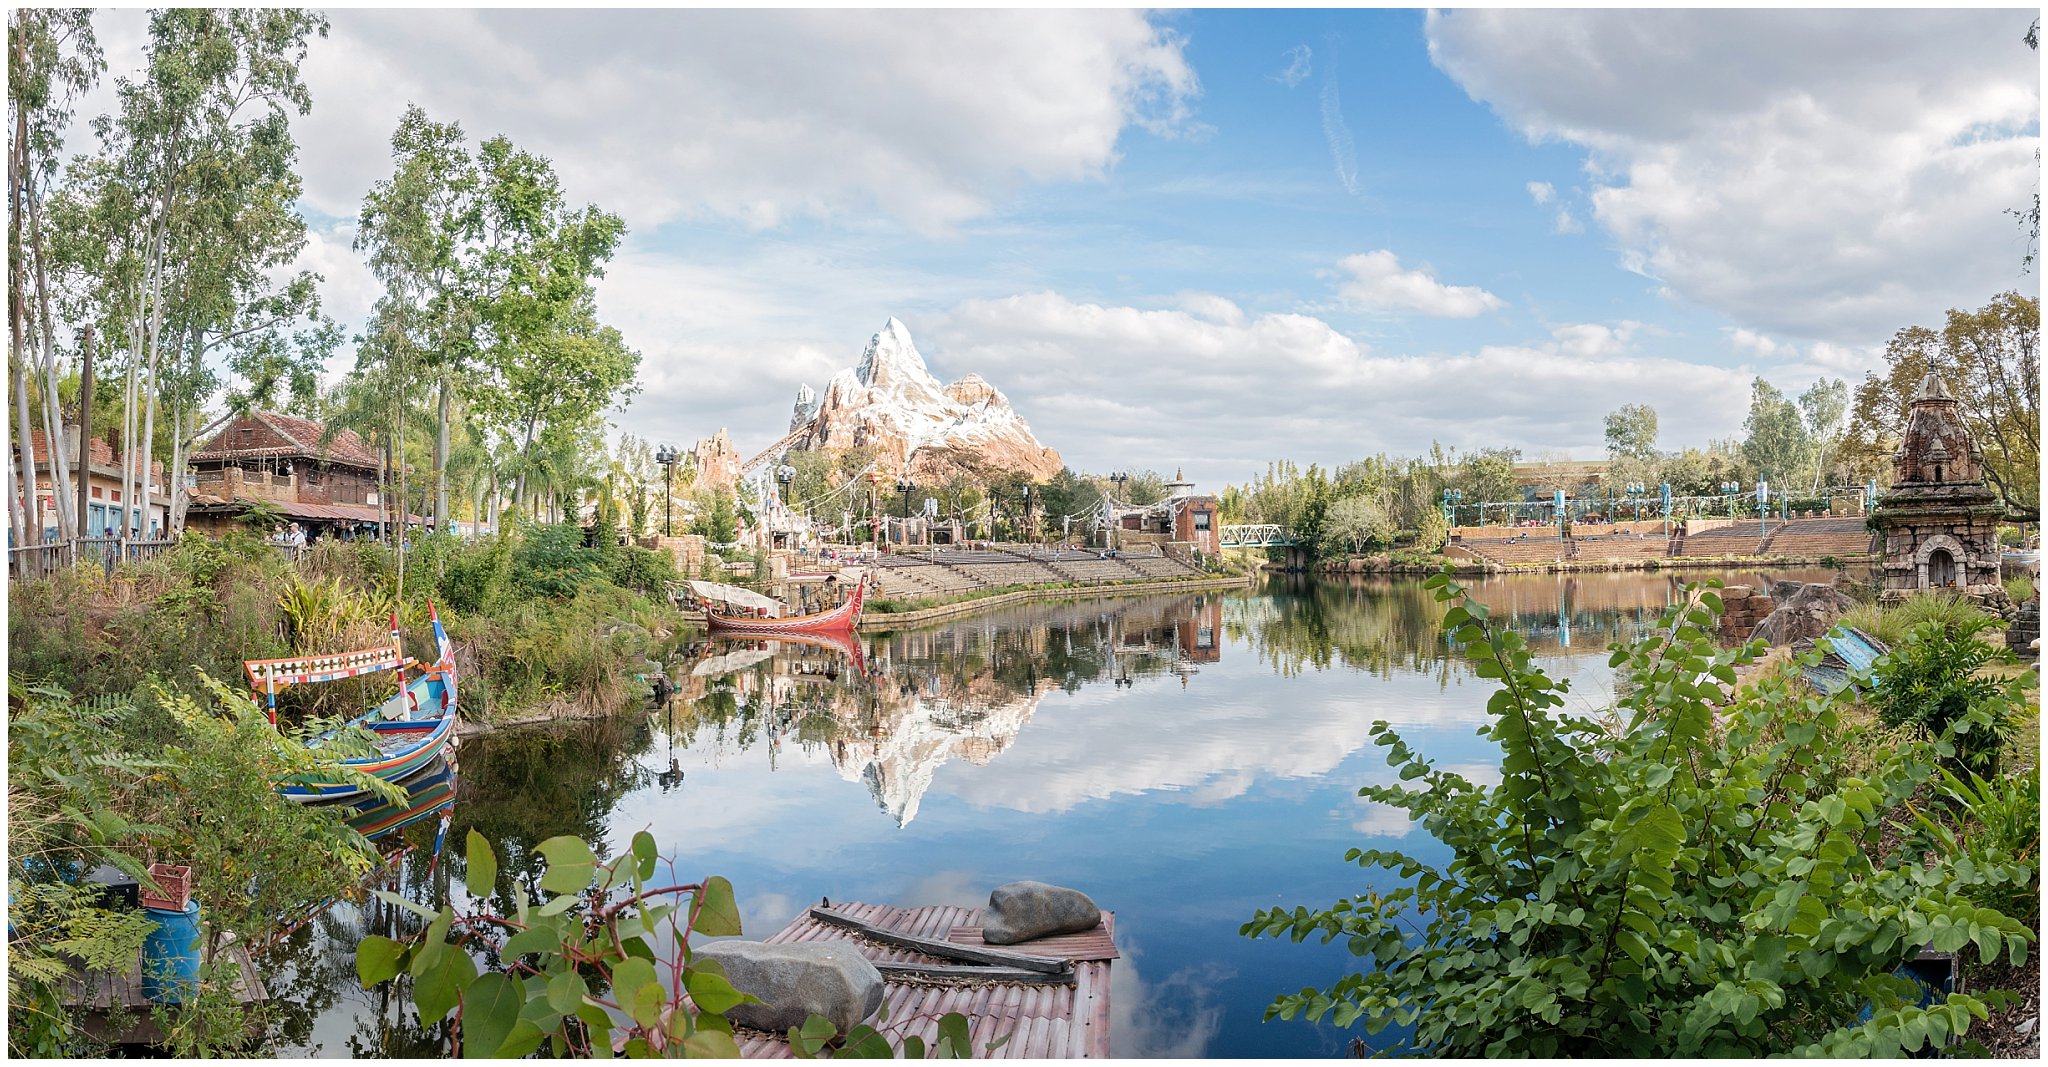 View of Everest in Animal Kingdom